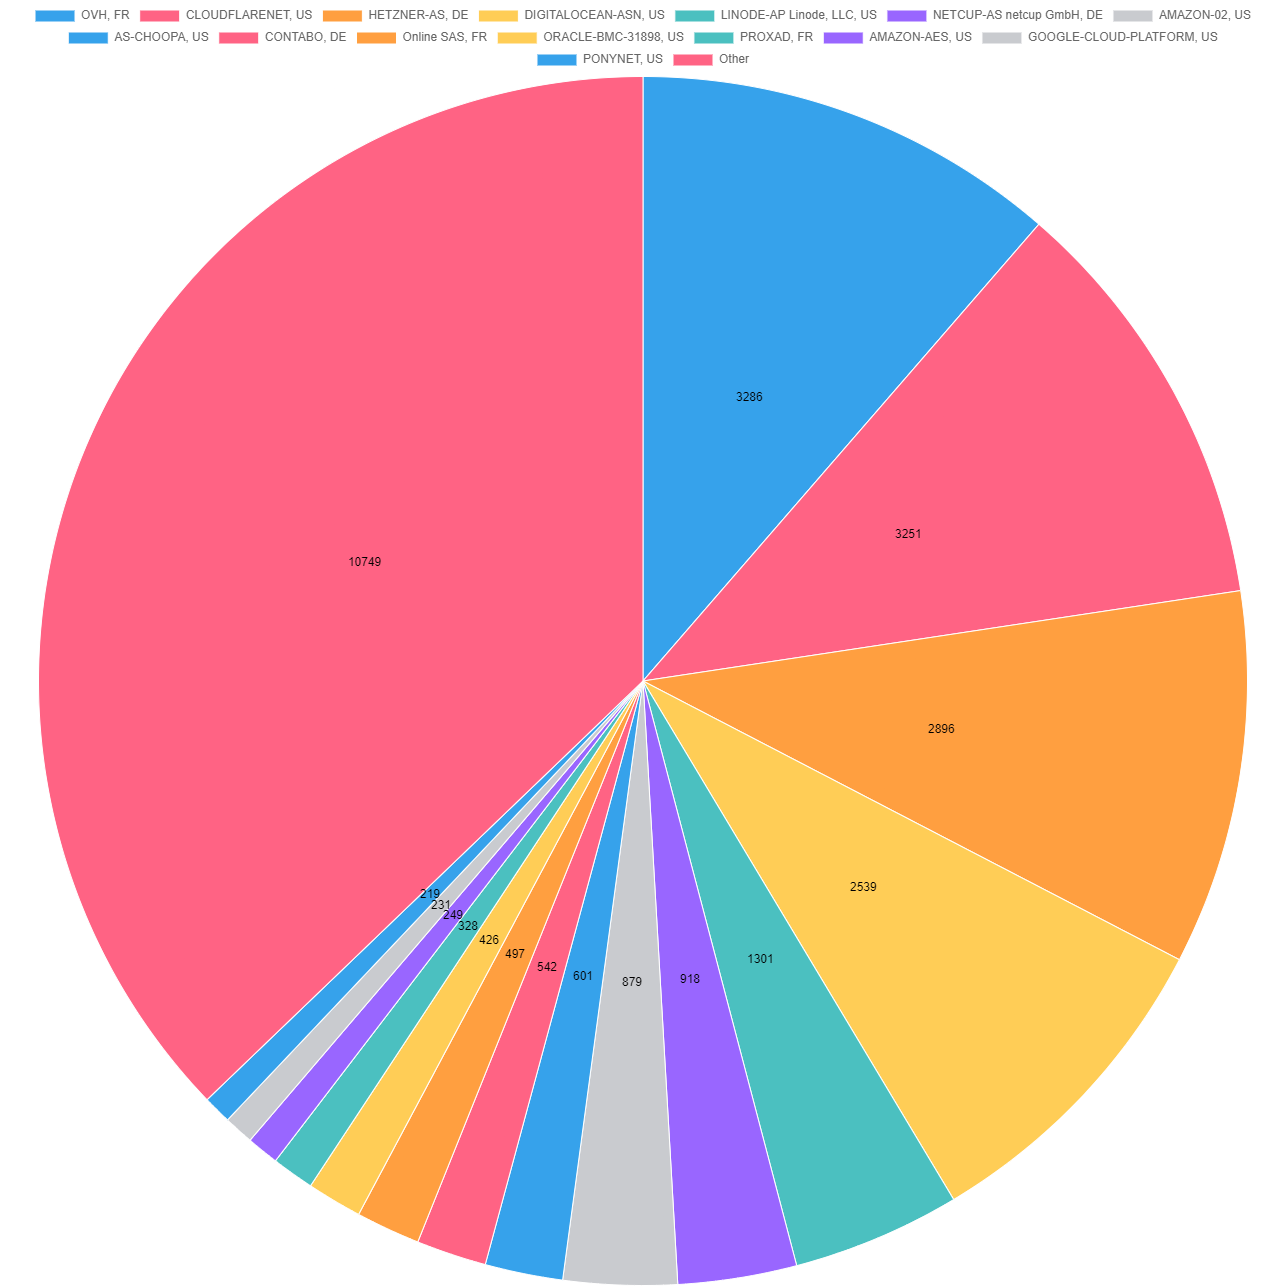 A pie chart showing the number of Mastodon instances by ASN. Other has 10740, OVH has 3286, Cloudflarenet has 3251. 